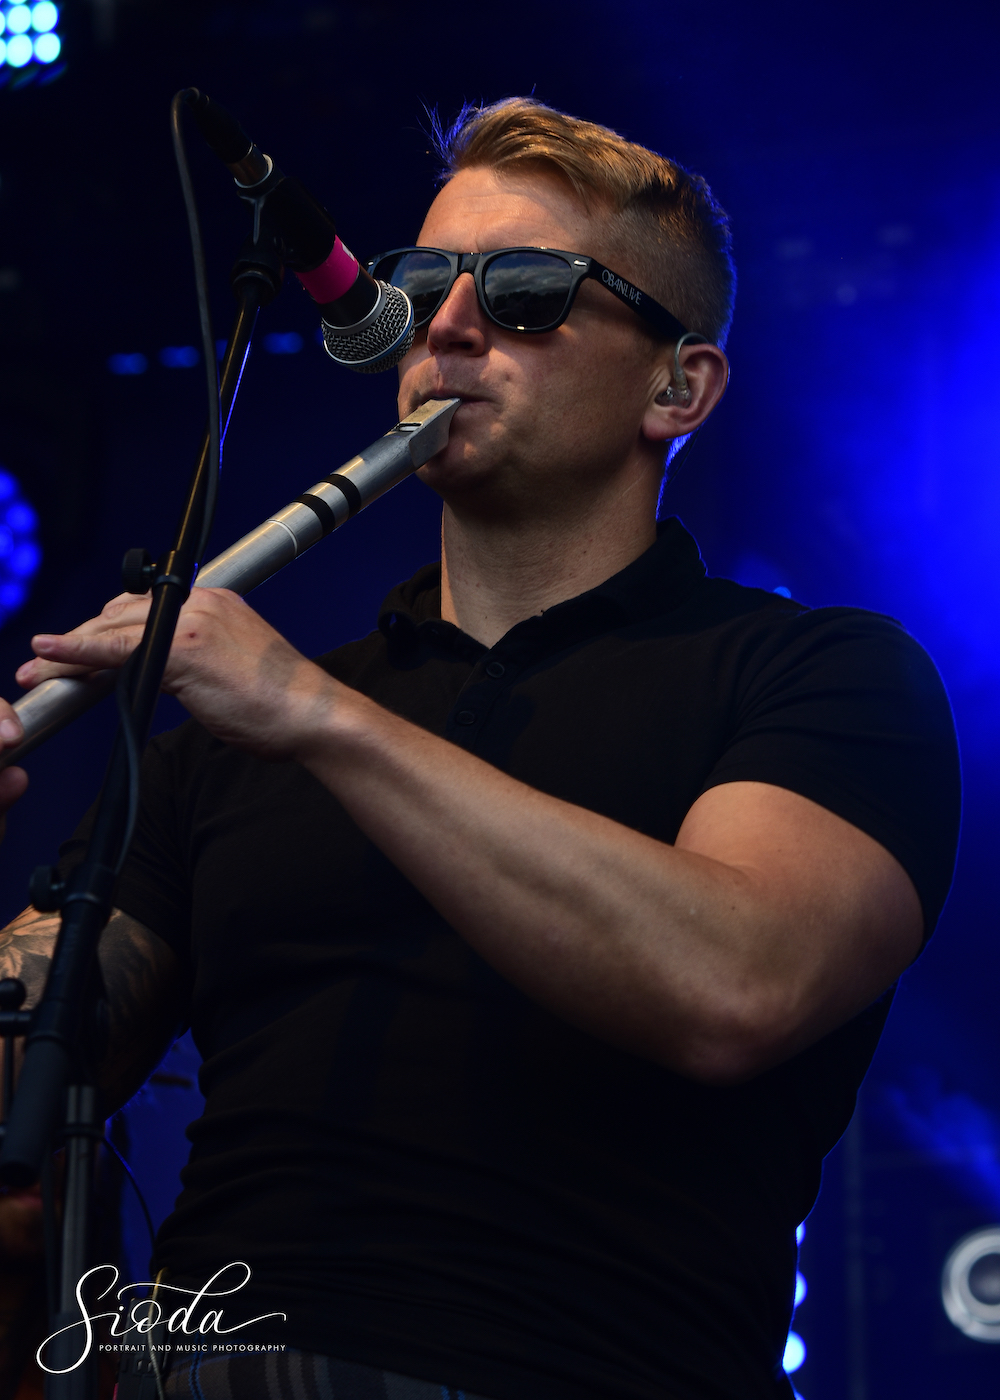 Skerryvore at Gathering 2022 Image No 1072 - The Gathering 2022 - Images